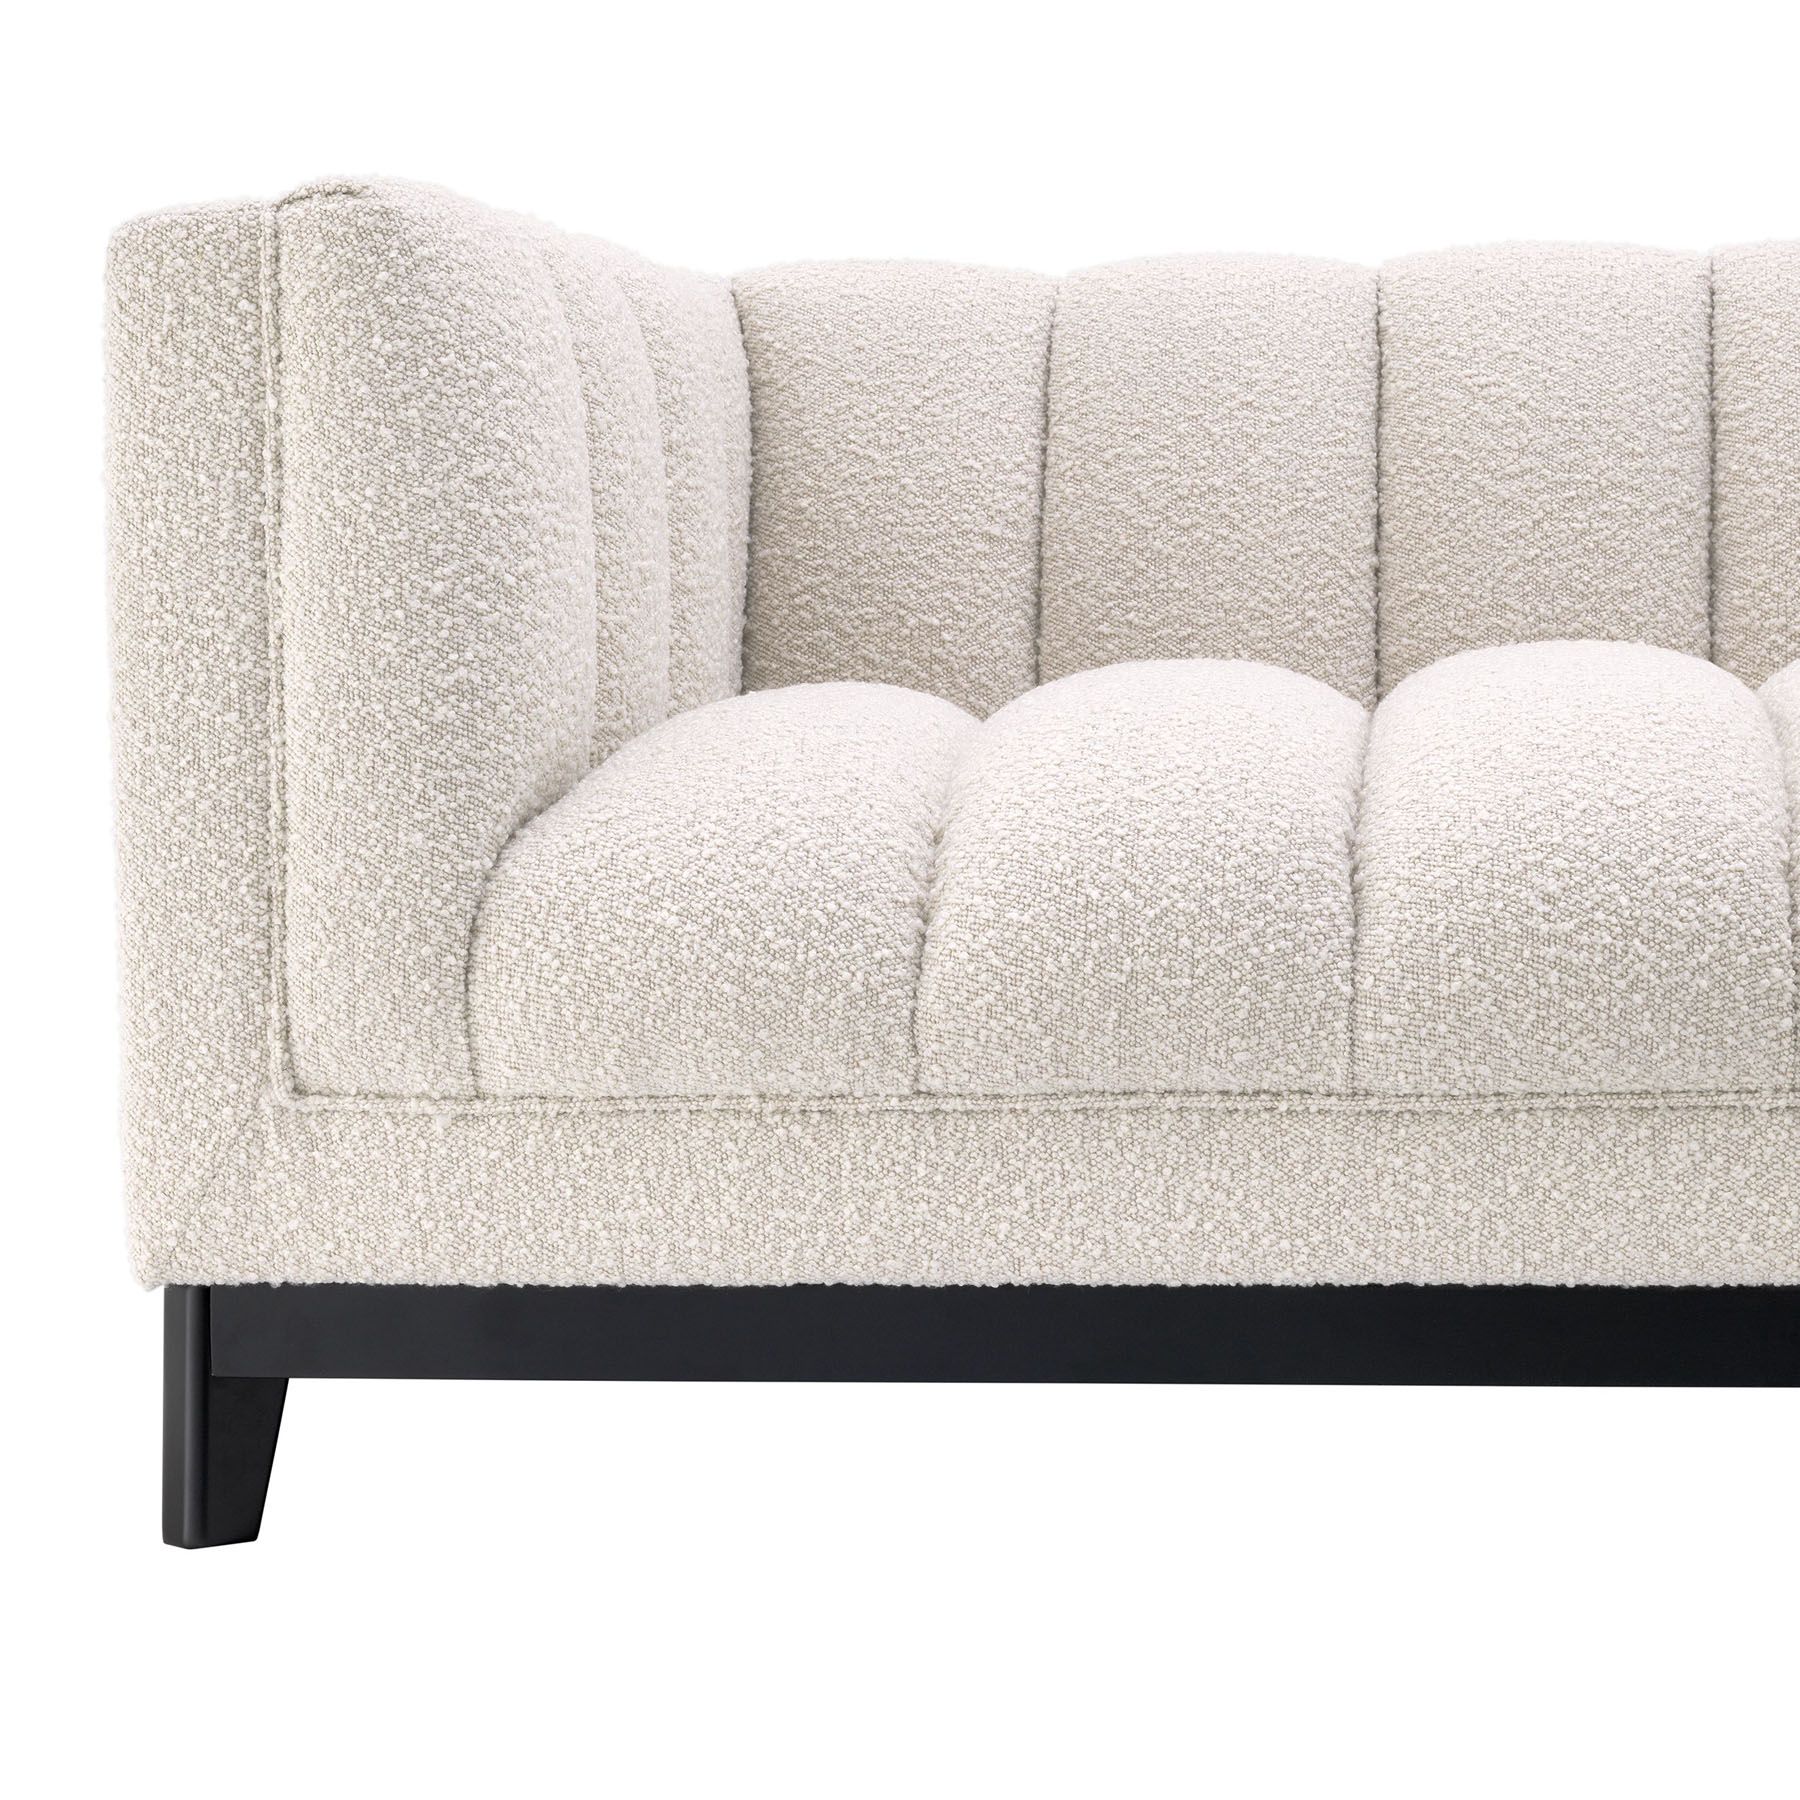 Ditmar Sofa Boucle Cream Eichholtz – Fmdesign Elements In Sofas In Cream (View 13 of 15)